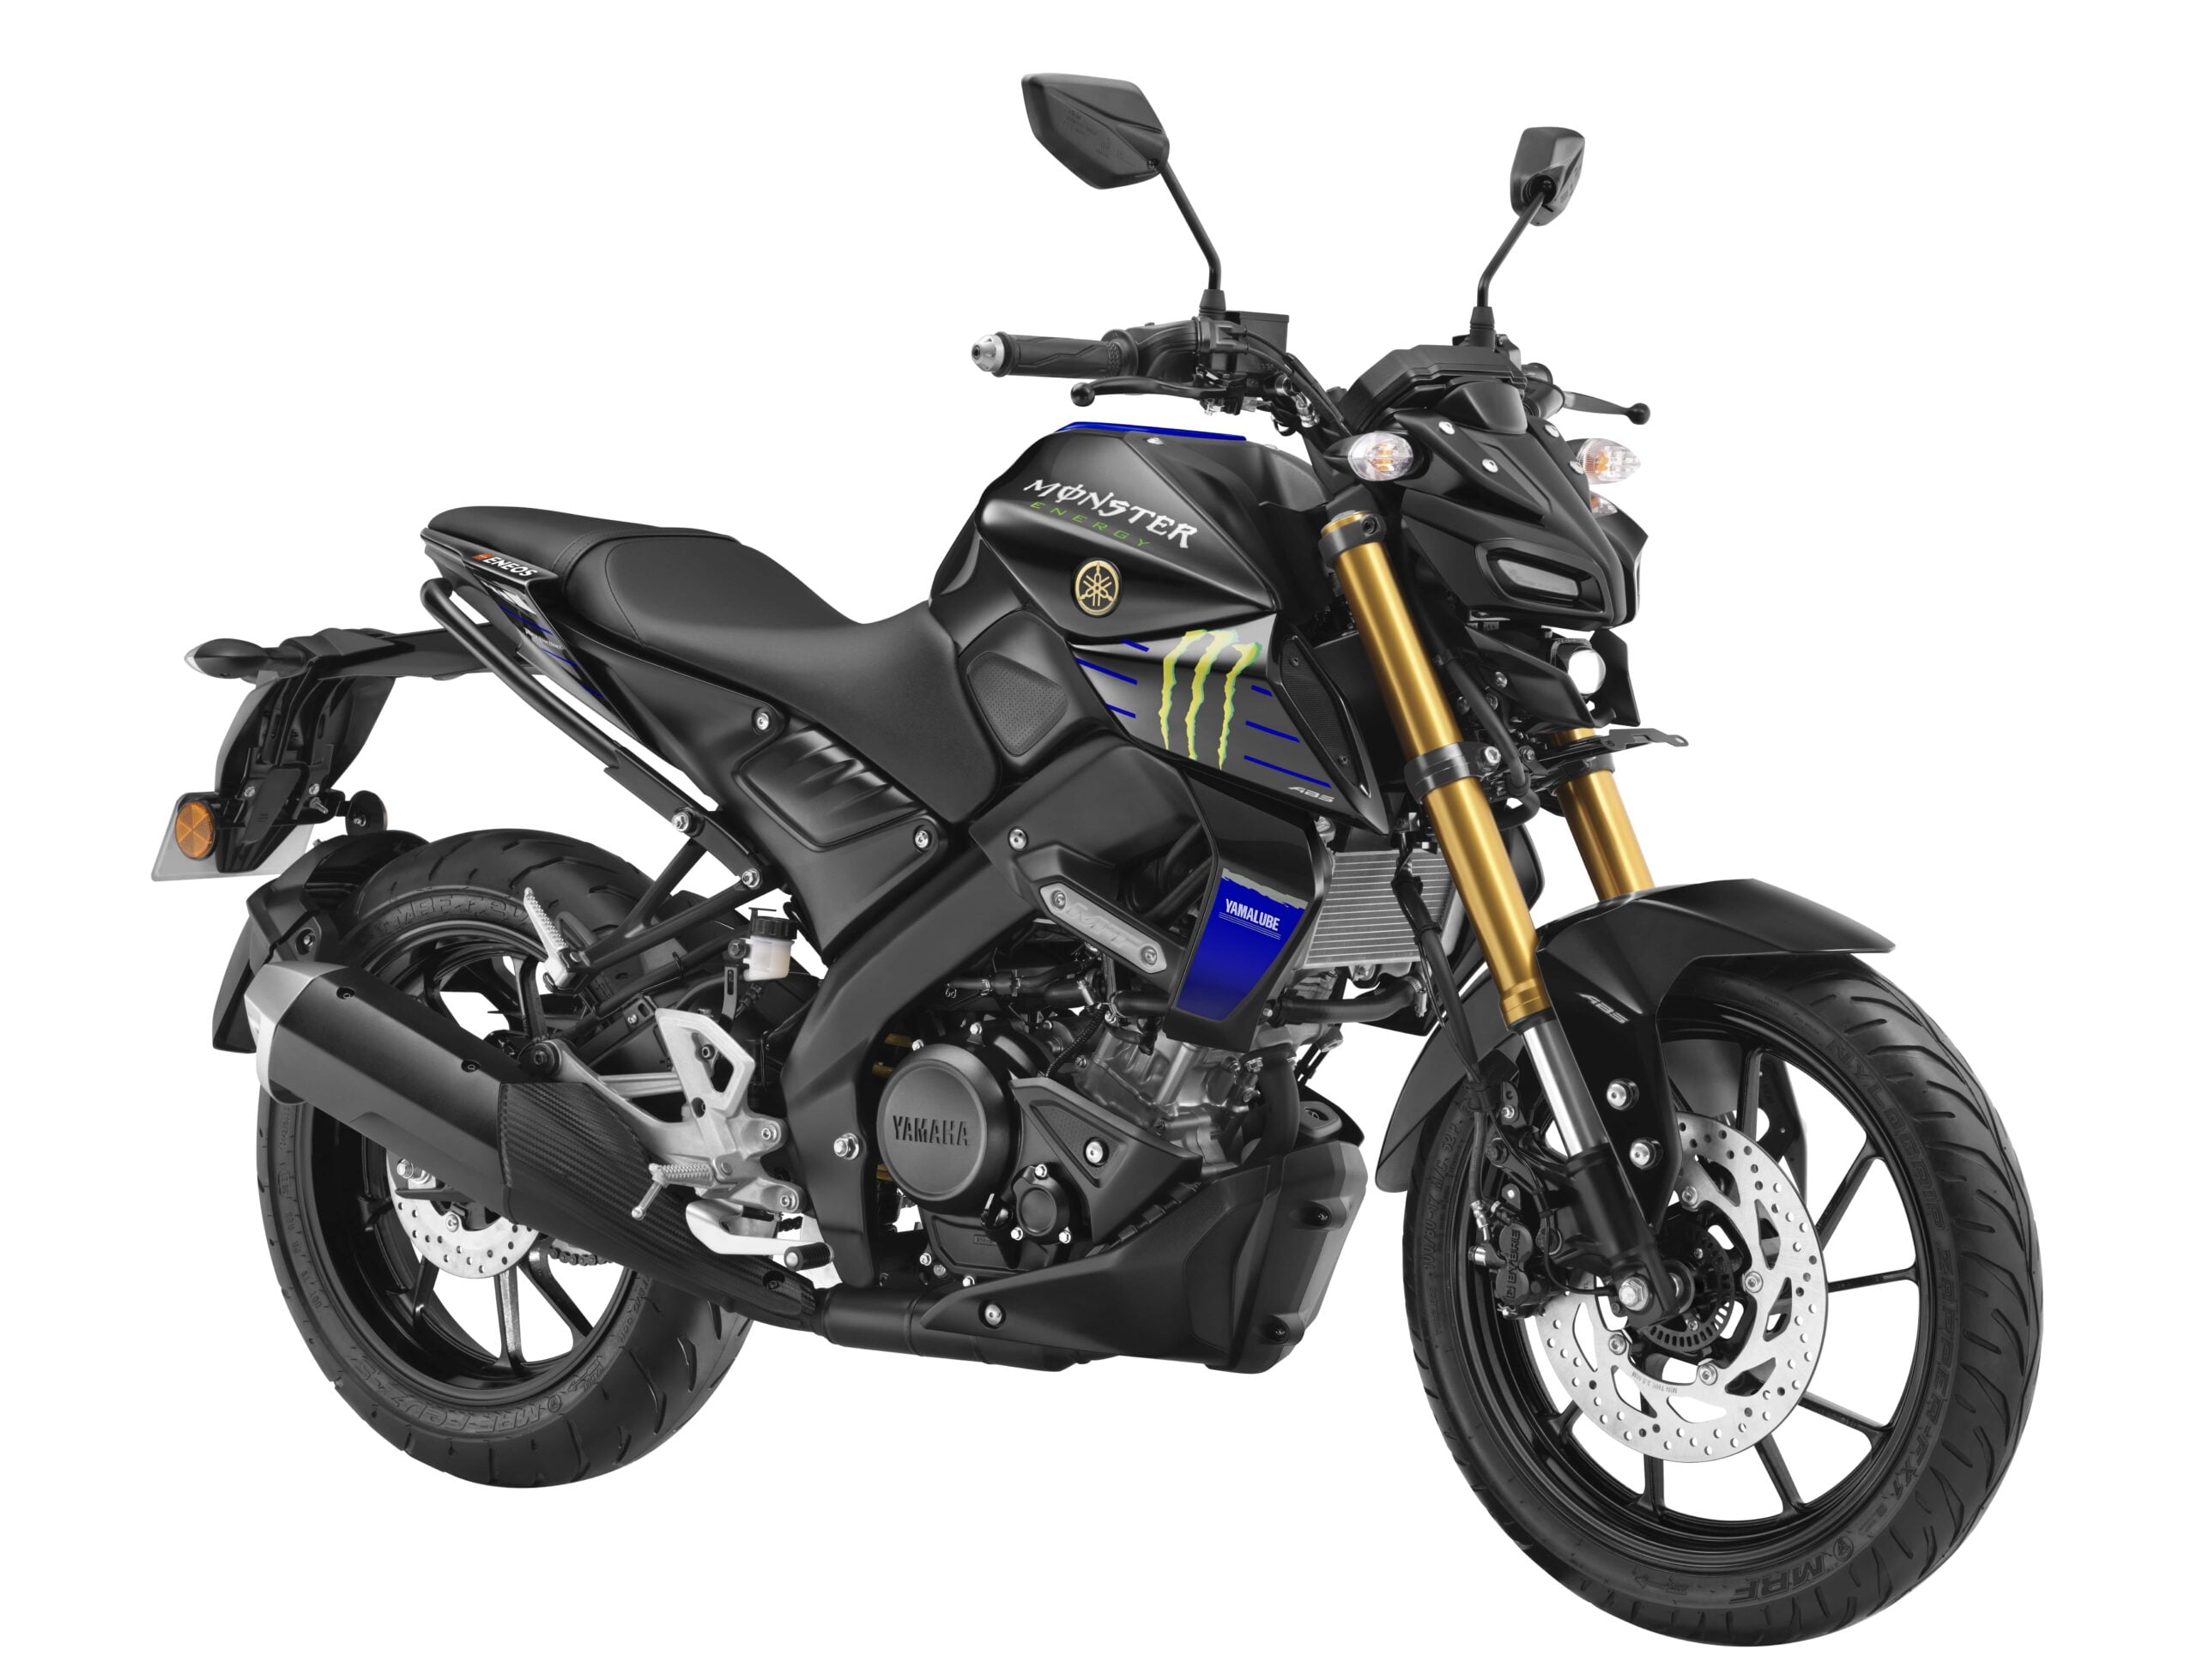 2022 Yamaha India Monster Energy Range Launched - Know Details! (3)